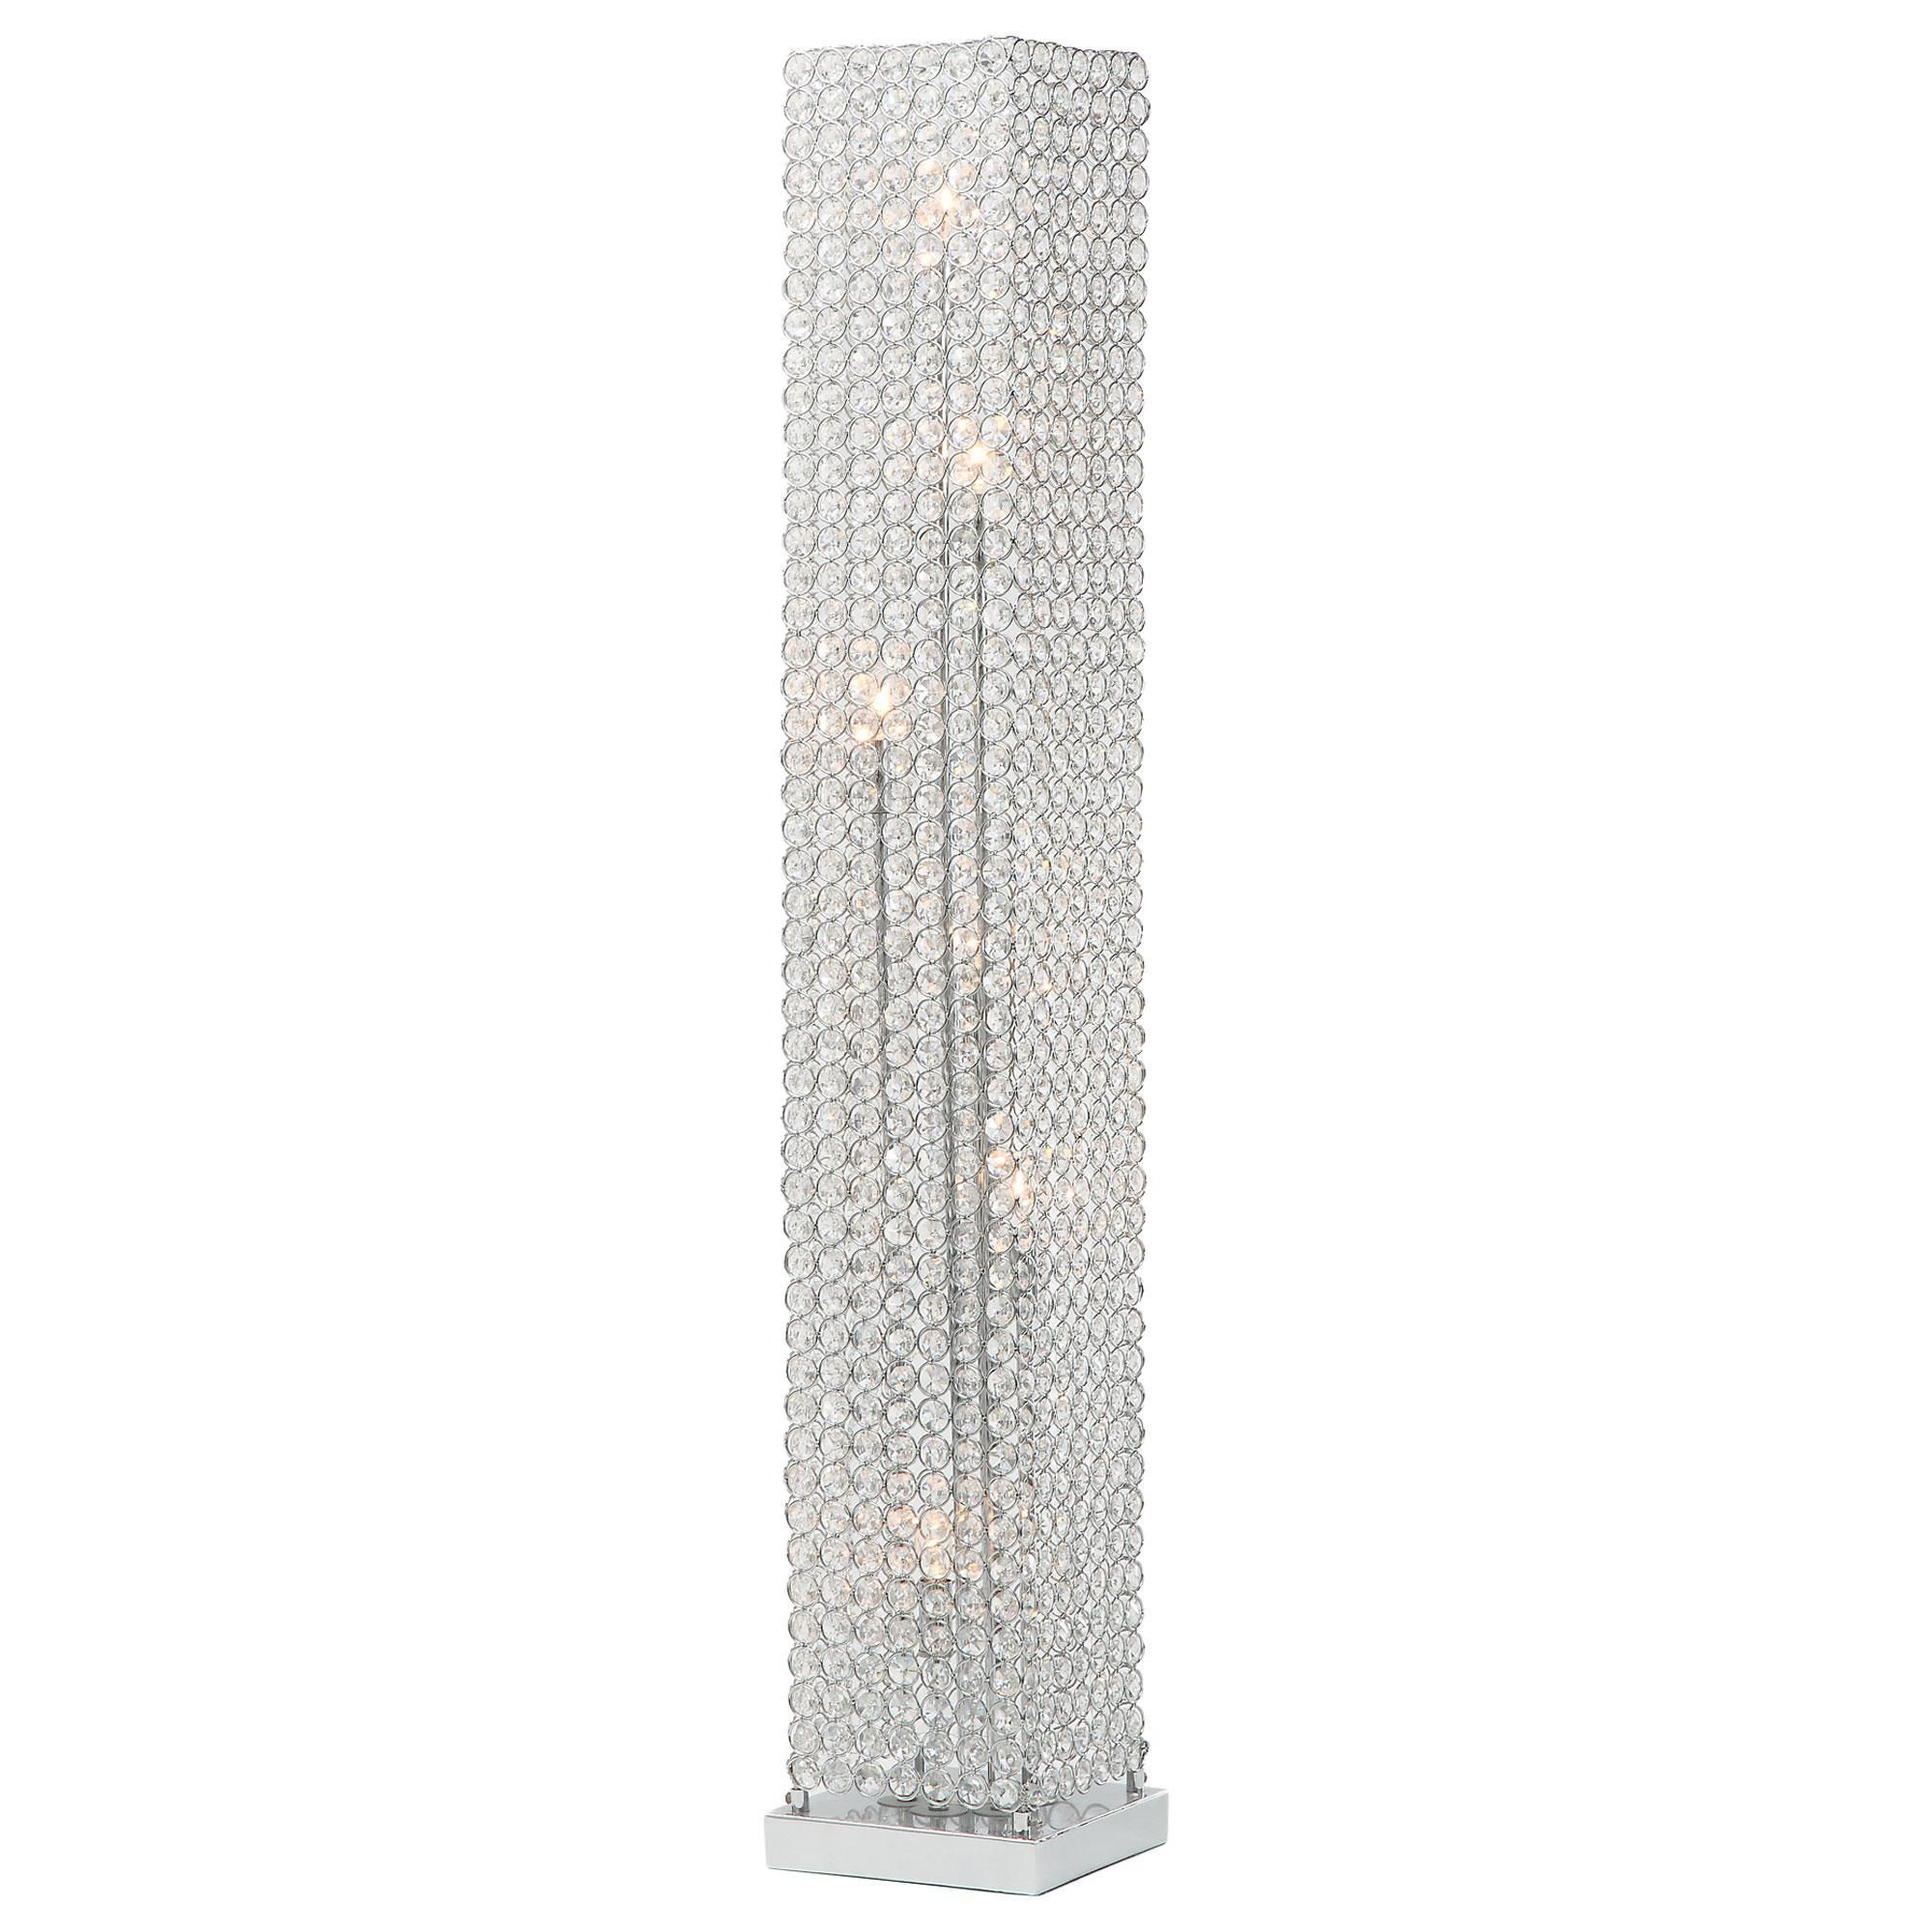 Chrome Crystal Tower Standing Lamps Pertaining To Latest Anthony California 49" Crystal Tower Floor Lamp In Chrome (View 1 of 15)